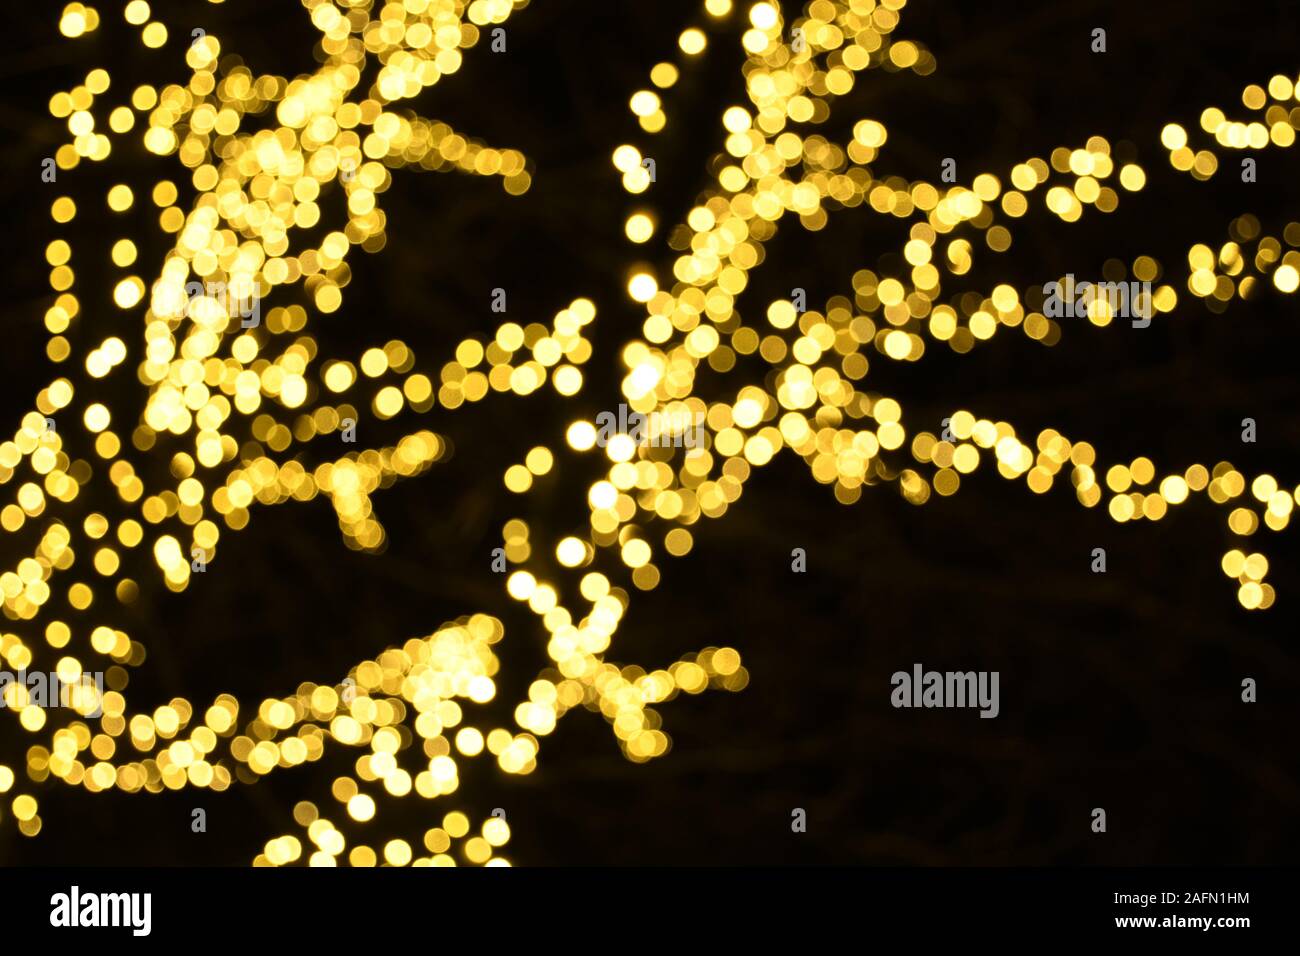 Abstract background yellow golden bokeh lights, branches of a tree in winter, warm feeling, warmth, celebration, magic dream Stock Photo